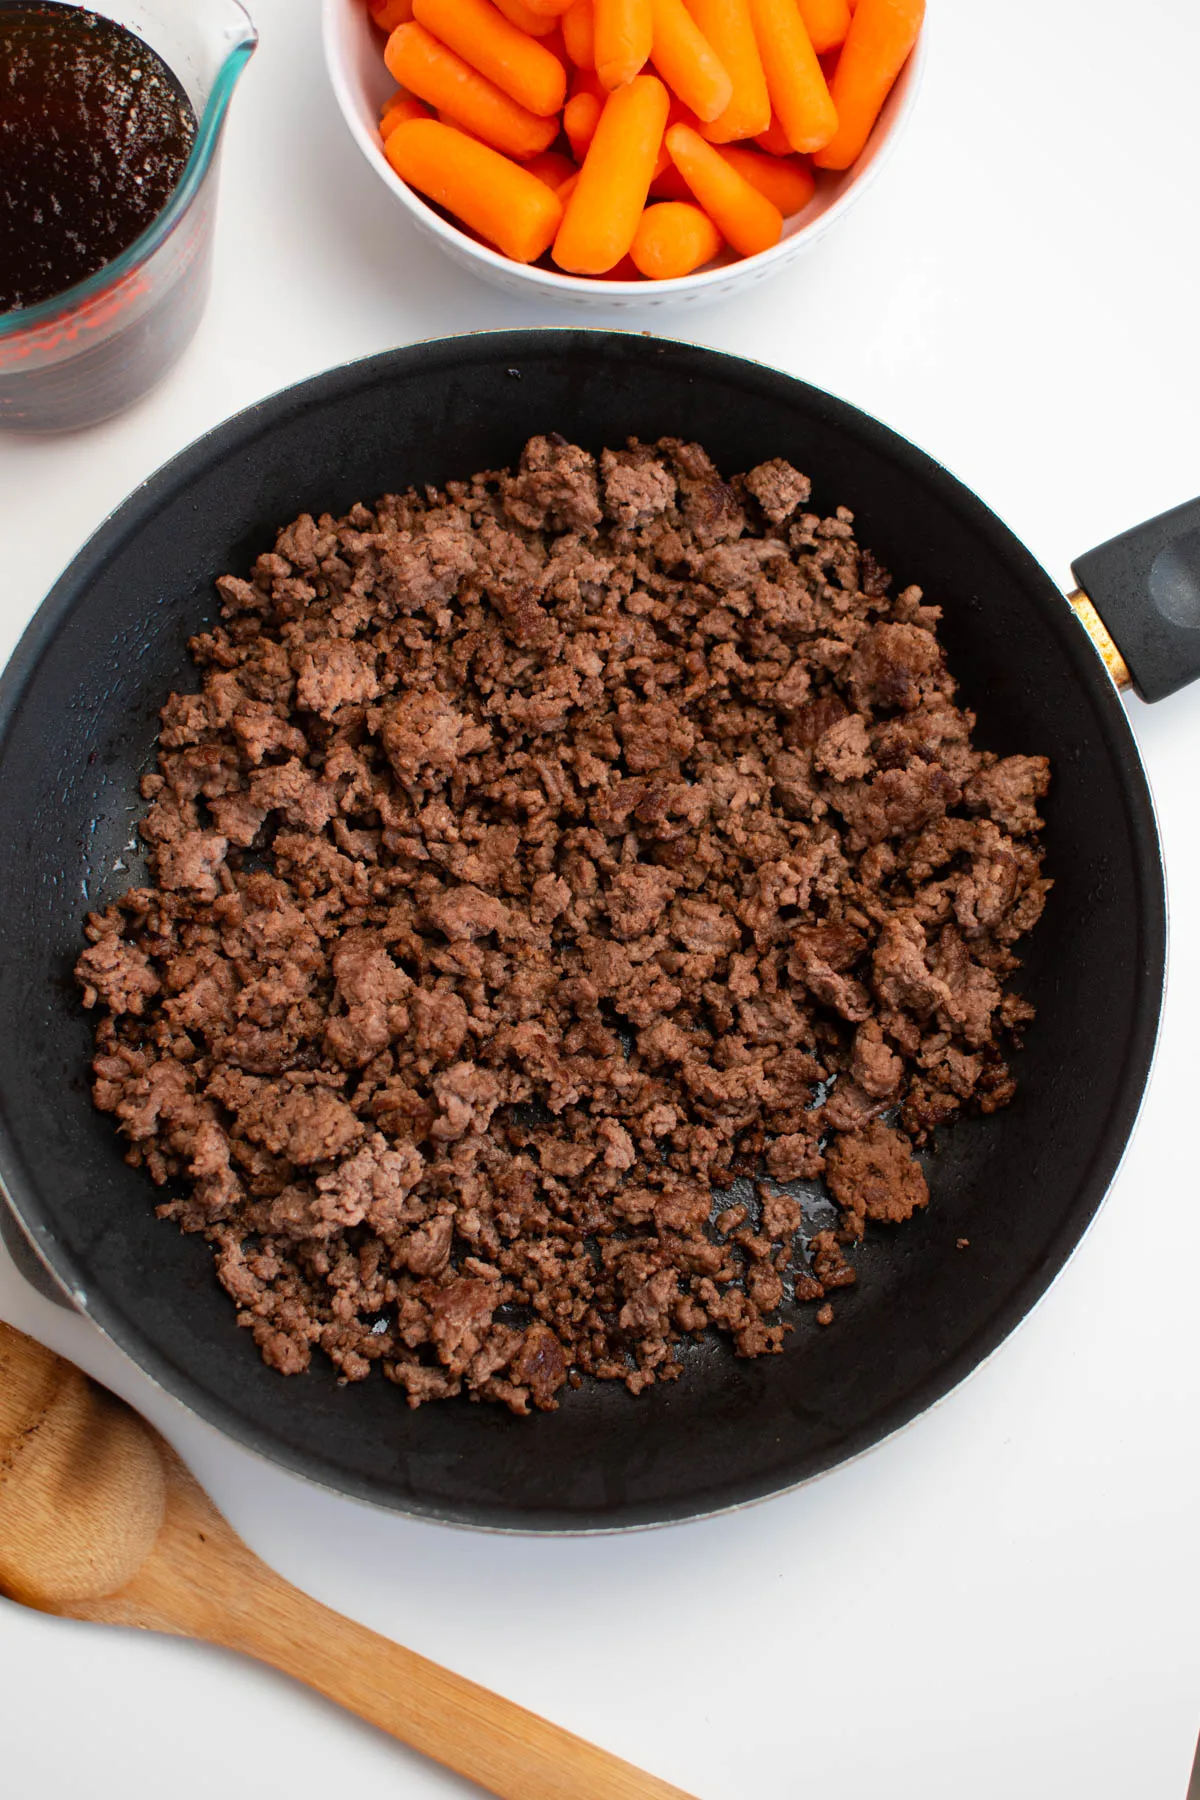 Cooked ground beef in black frying pan on white table.